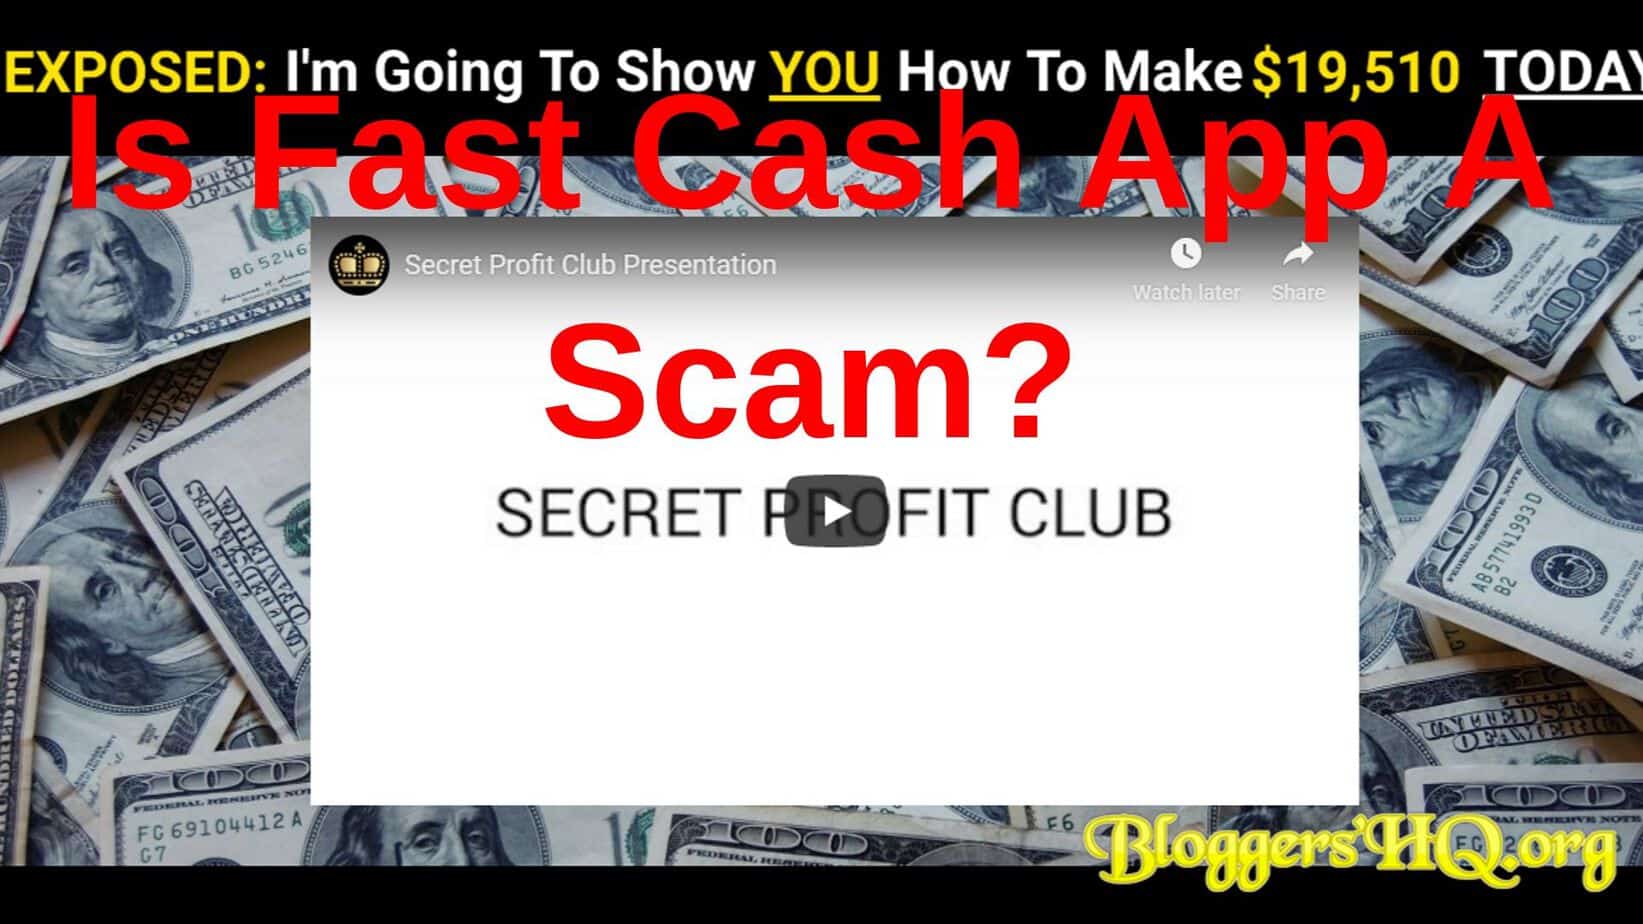 59 Top Pictures Cash App 750 Scam - Big Time Cash: Legit App Or Scam? Can You REALLY Win BIG ...